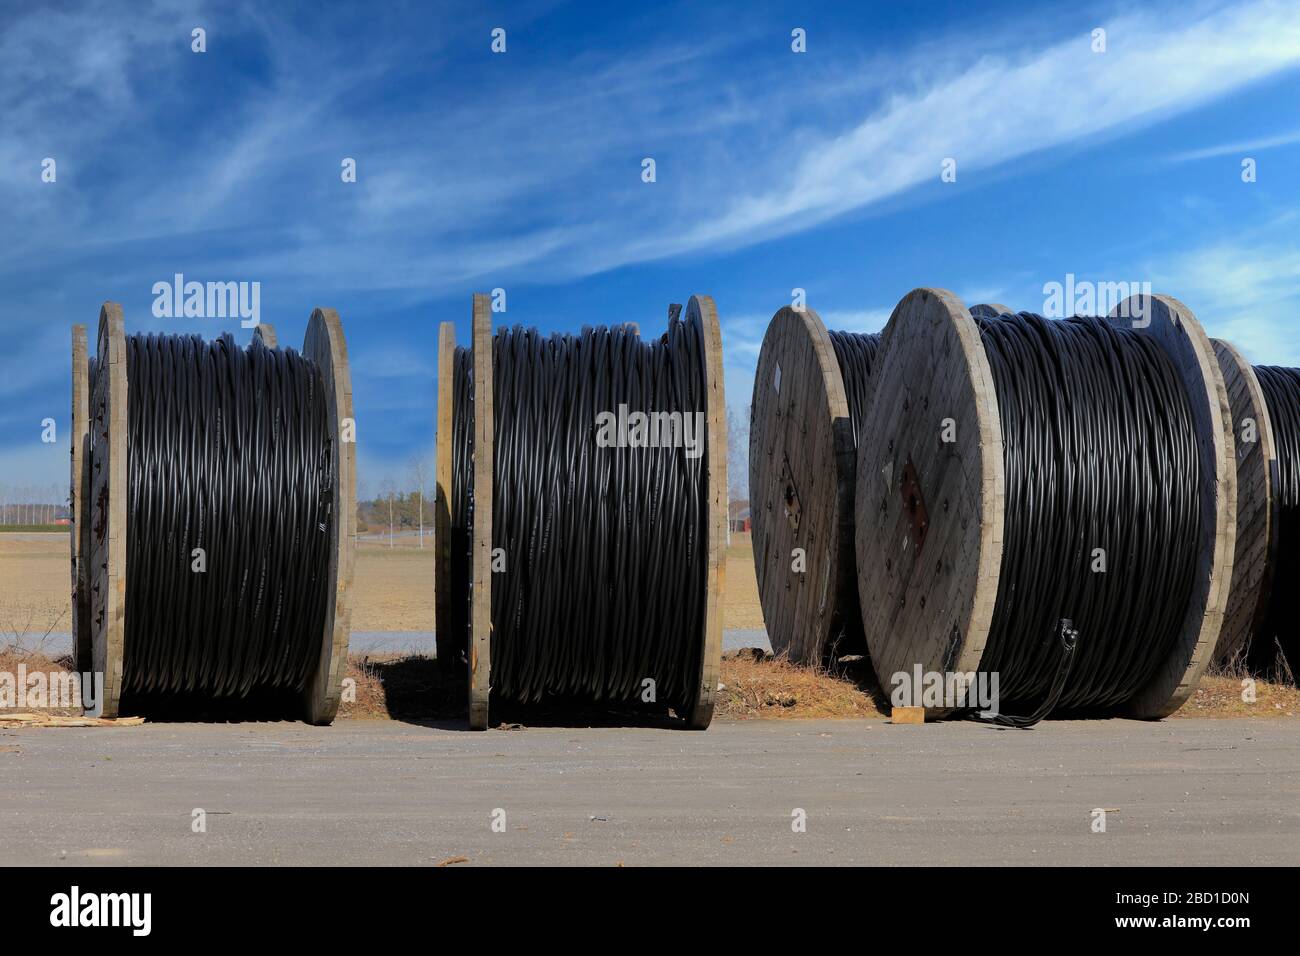 Prysmian Group Wiski Plain cable reels for ground installations at rural work site with blue sky clouds background. Marttila, Finland. April 6, 2019. Stock Photo